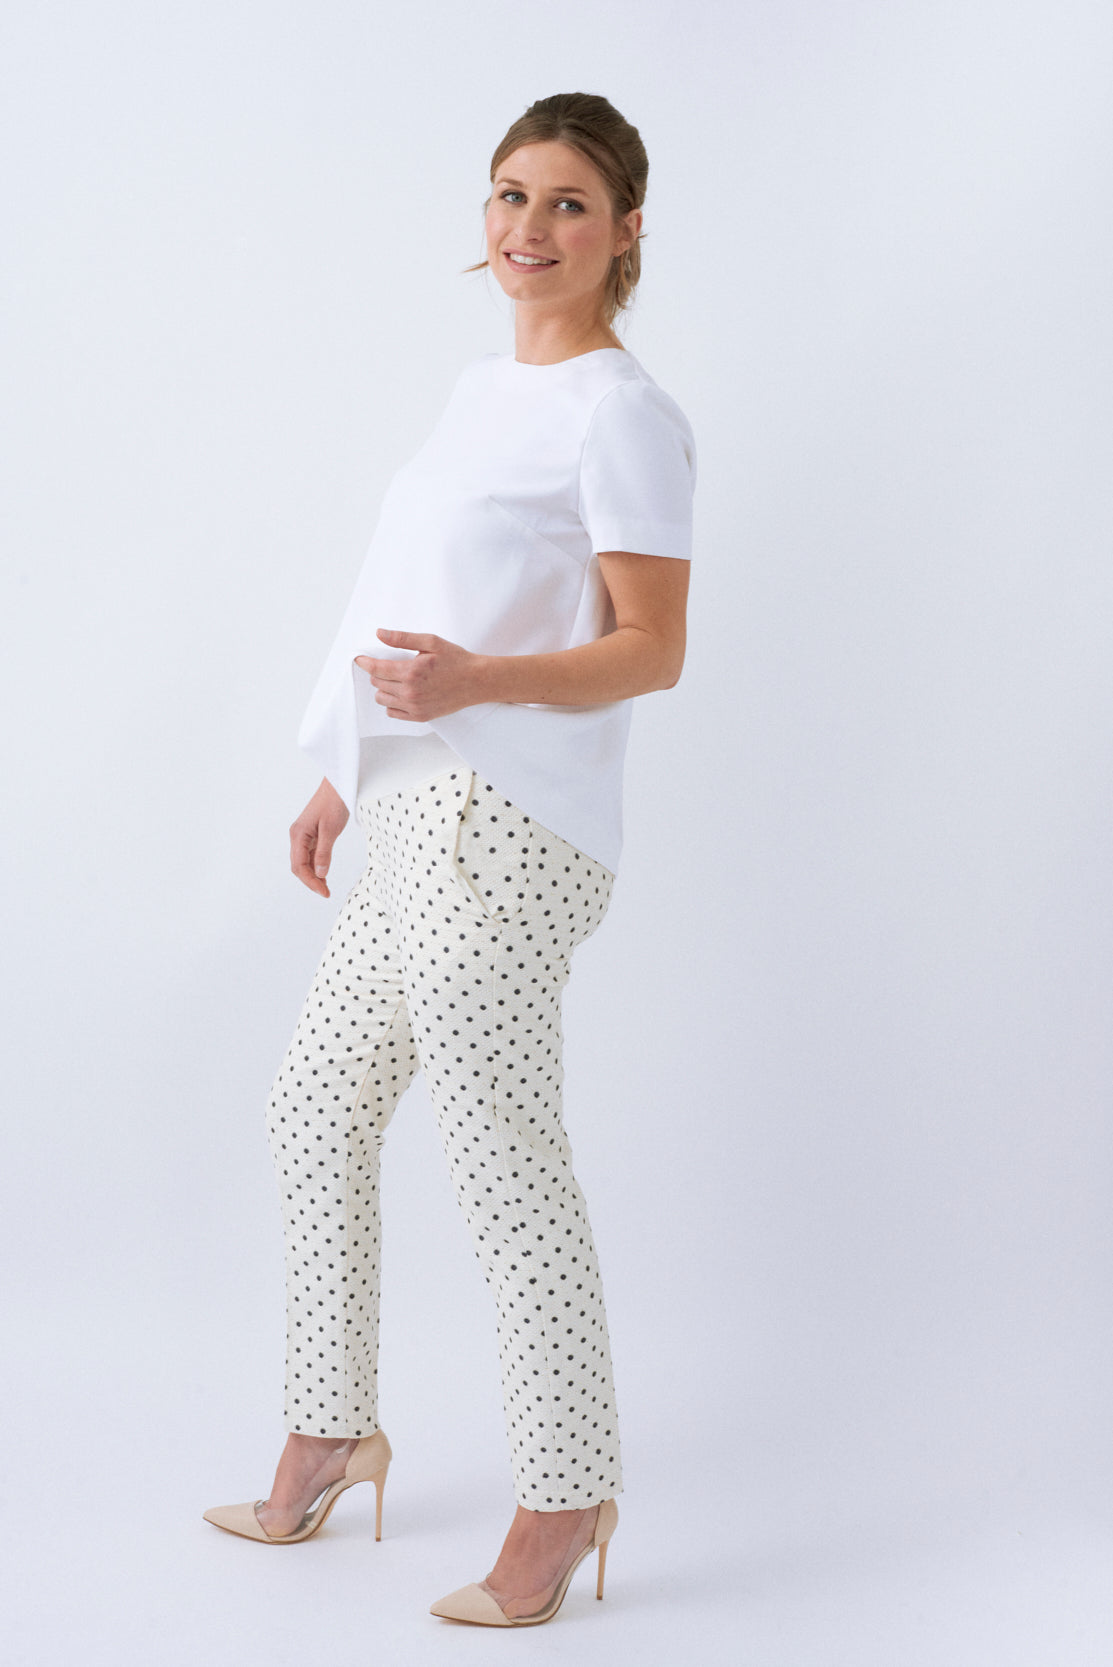 Elegant occasion wear maternity trousers, in a luxury cream fabric with a gold thread. Adds instant chic to your pregnancy wardrobe for weddings, evenings and special occasions, also works in the office. A flattering slim-fit elongates the legs, sitting at ankle length to look as good with flat shoes as well as heels.